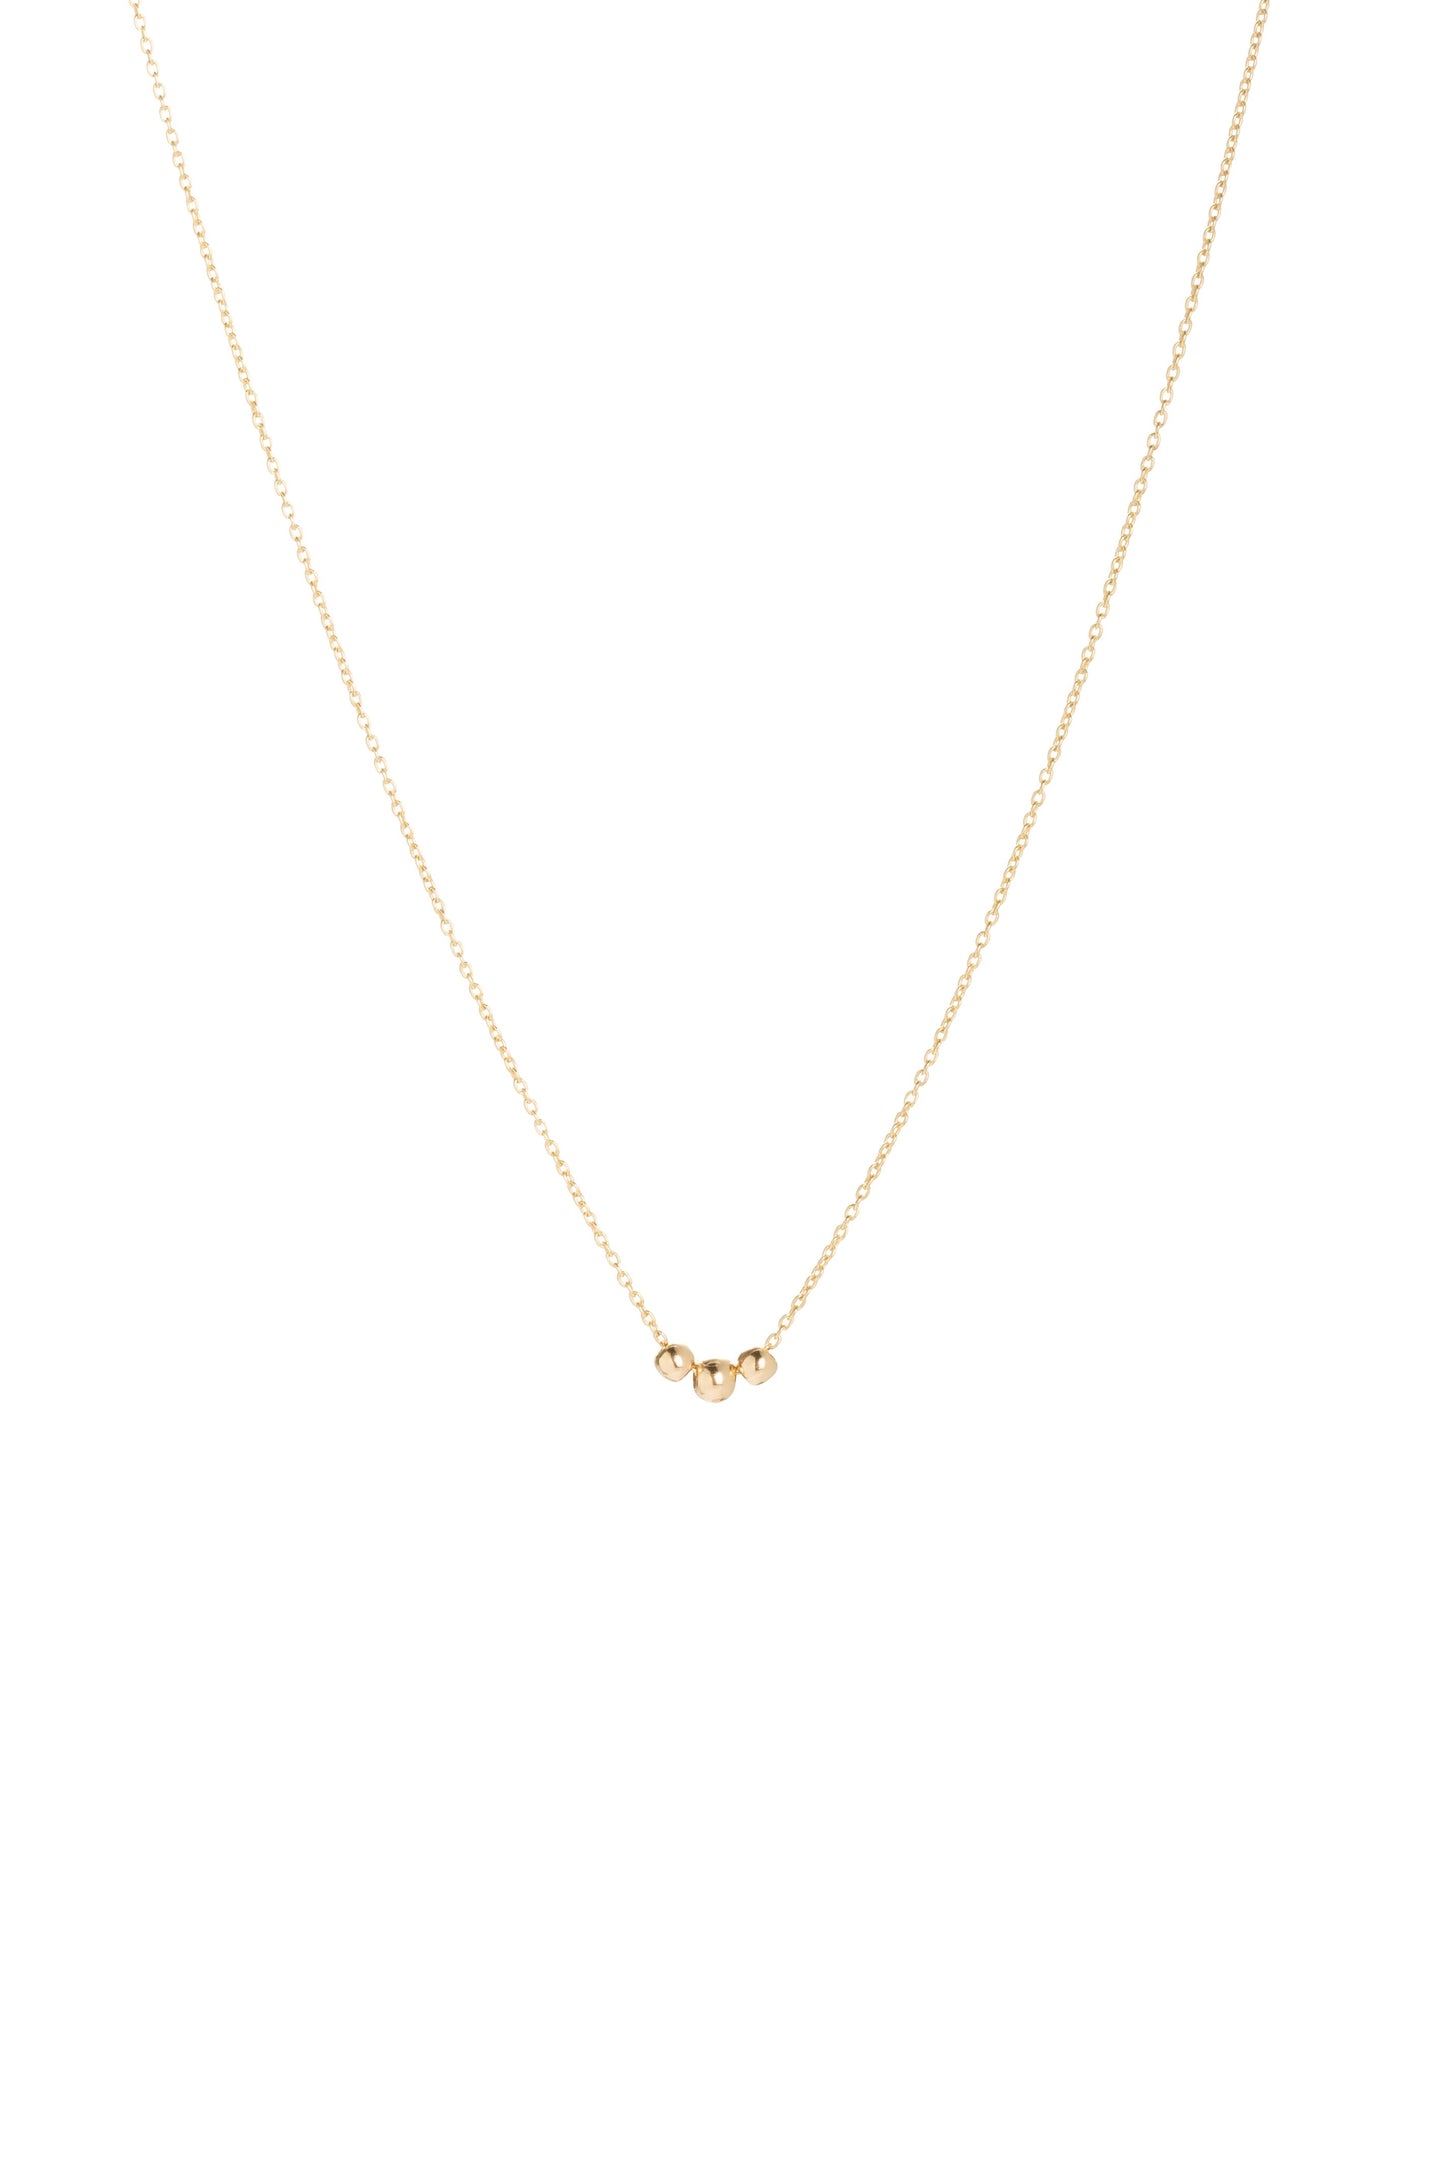 Aynur Abbott - N#02 Delicate triple ball gold necklace